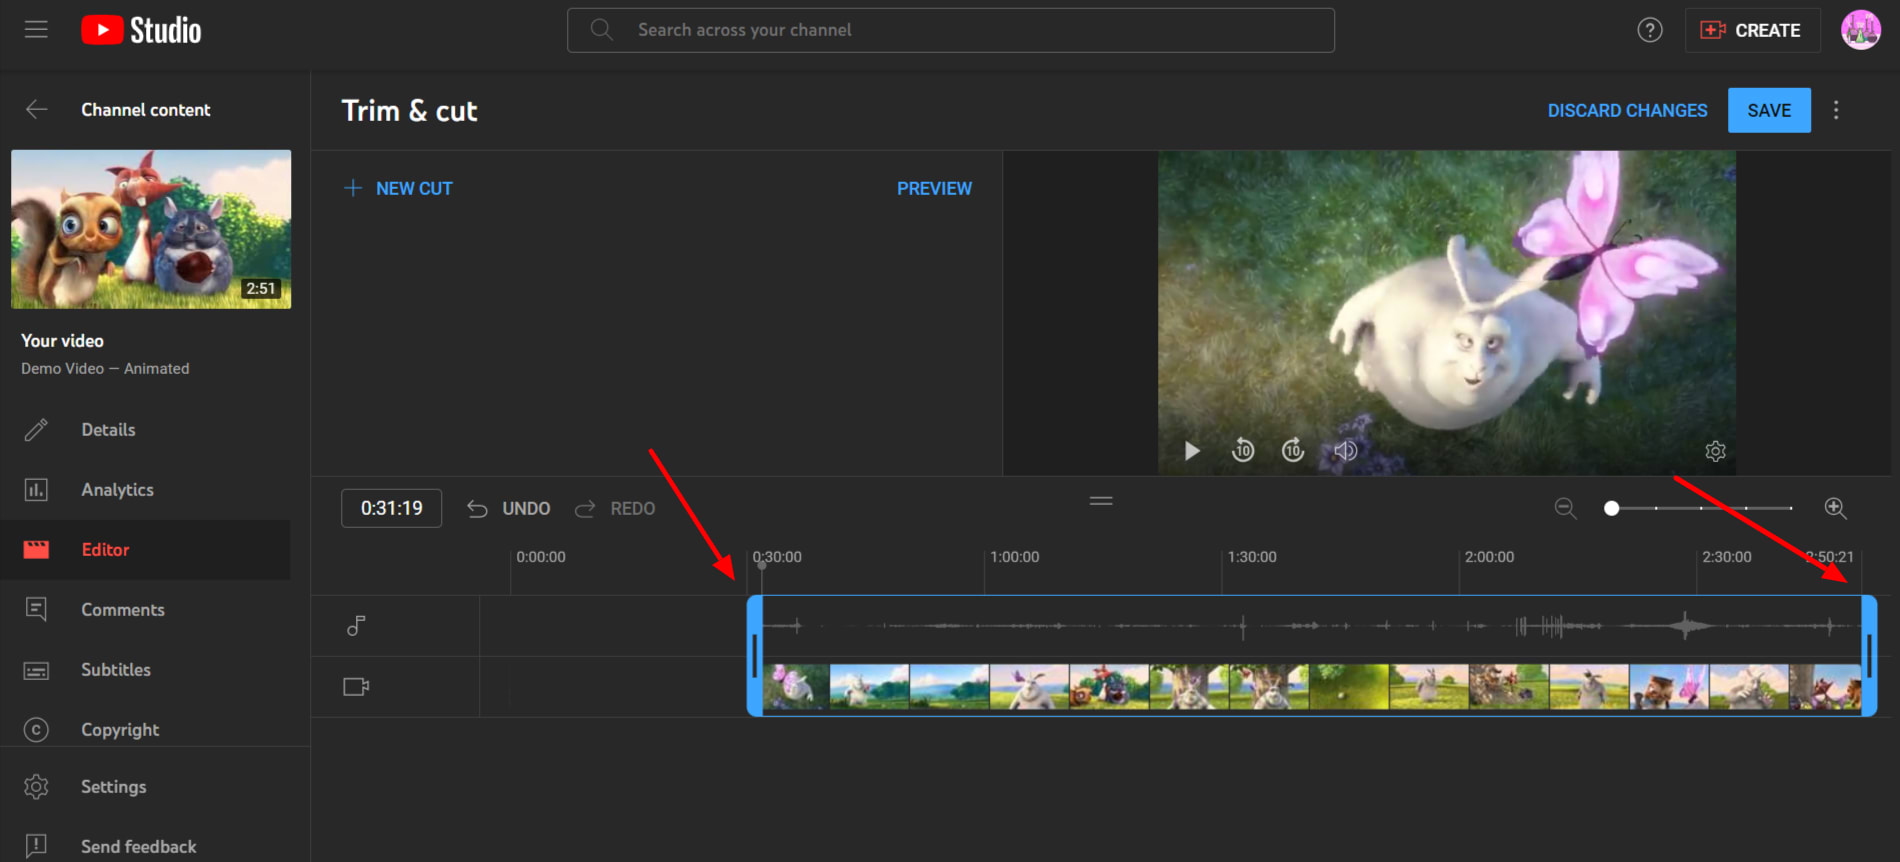 Trim your videos by moving the blue bar